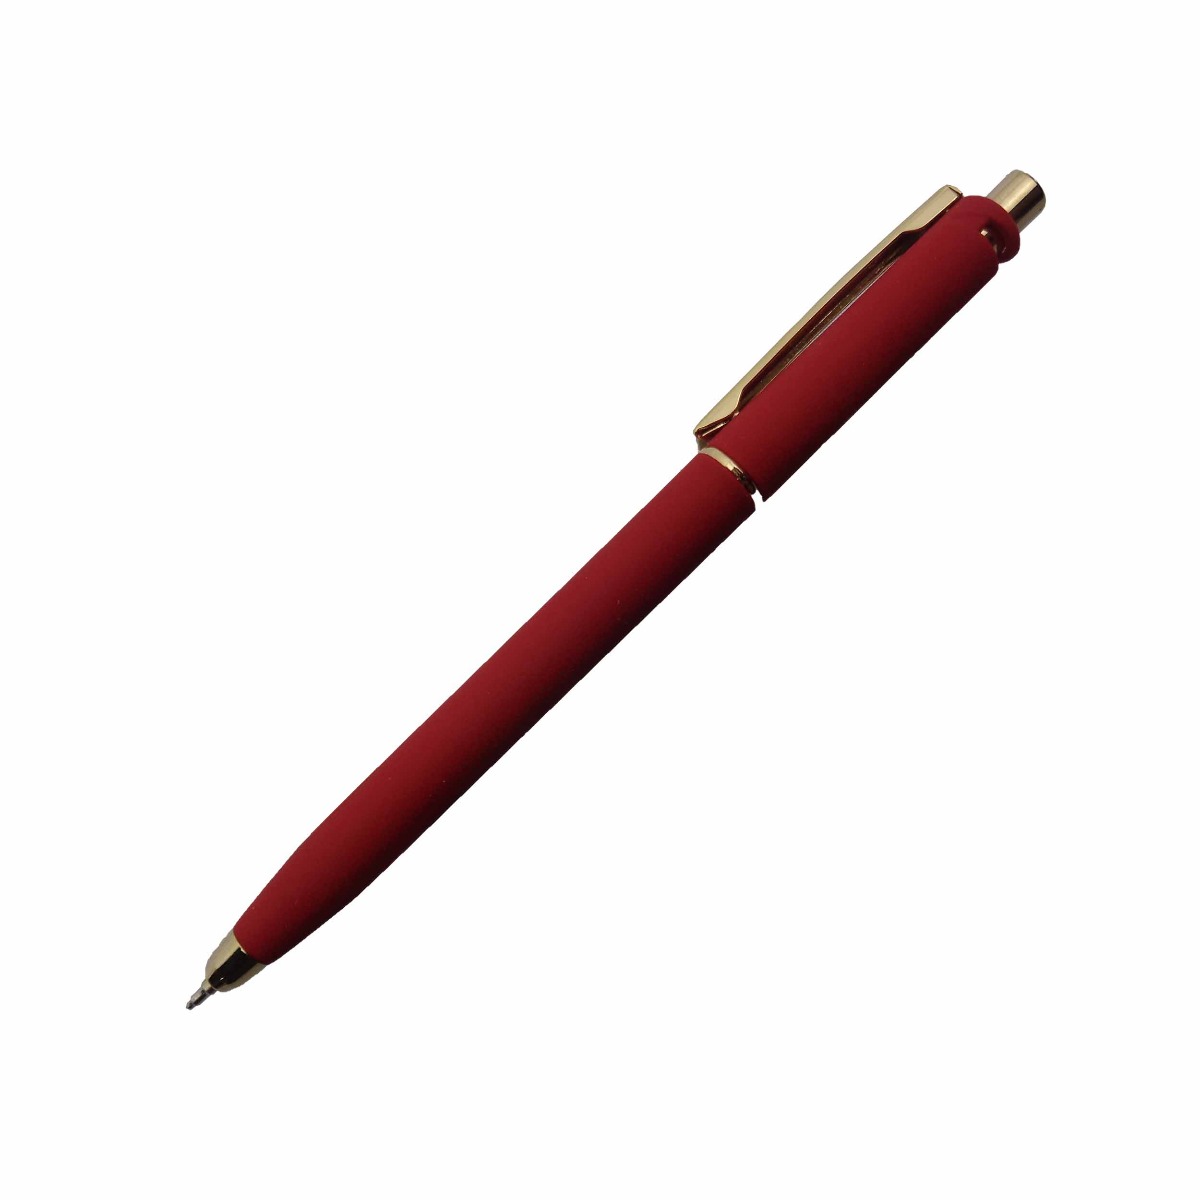 Reynolds Model 15336 Aerosoft gold Red color body with golden clip fine tip retractable ball pen